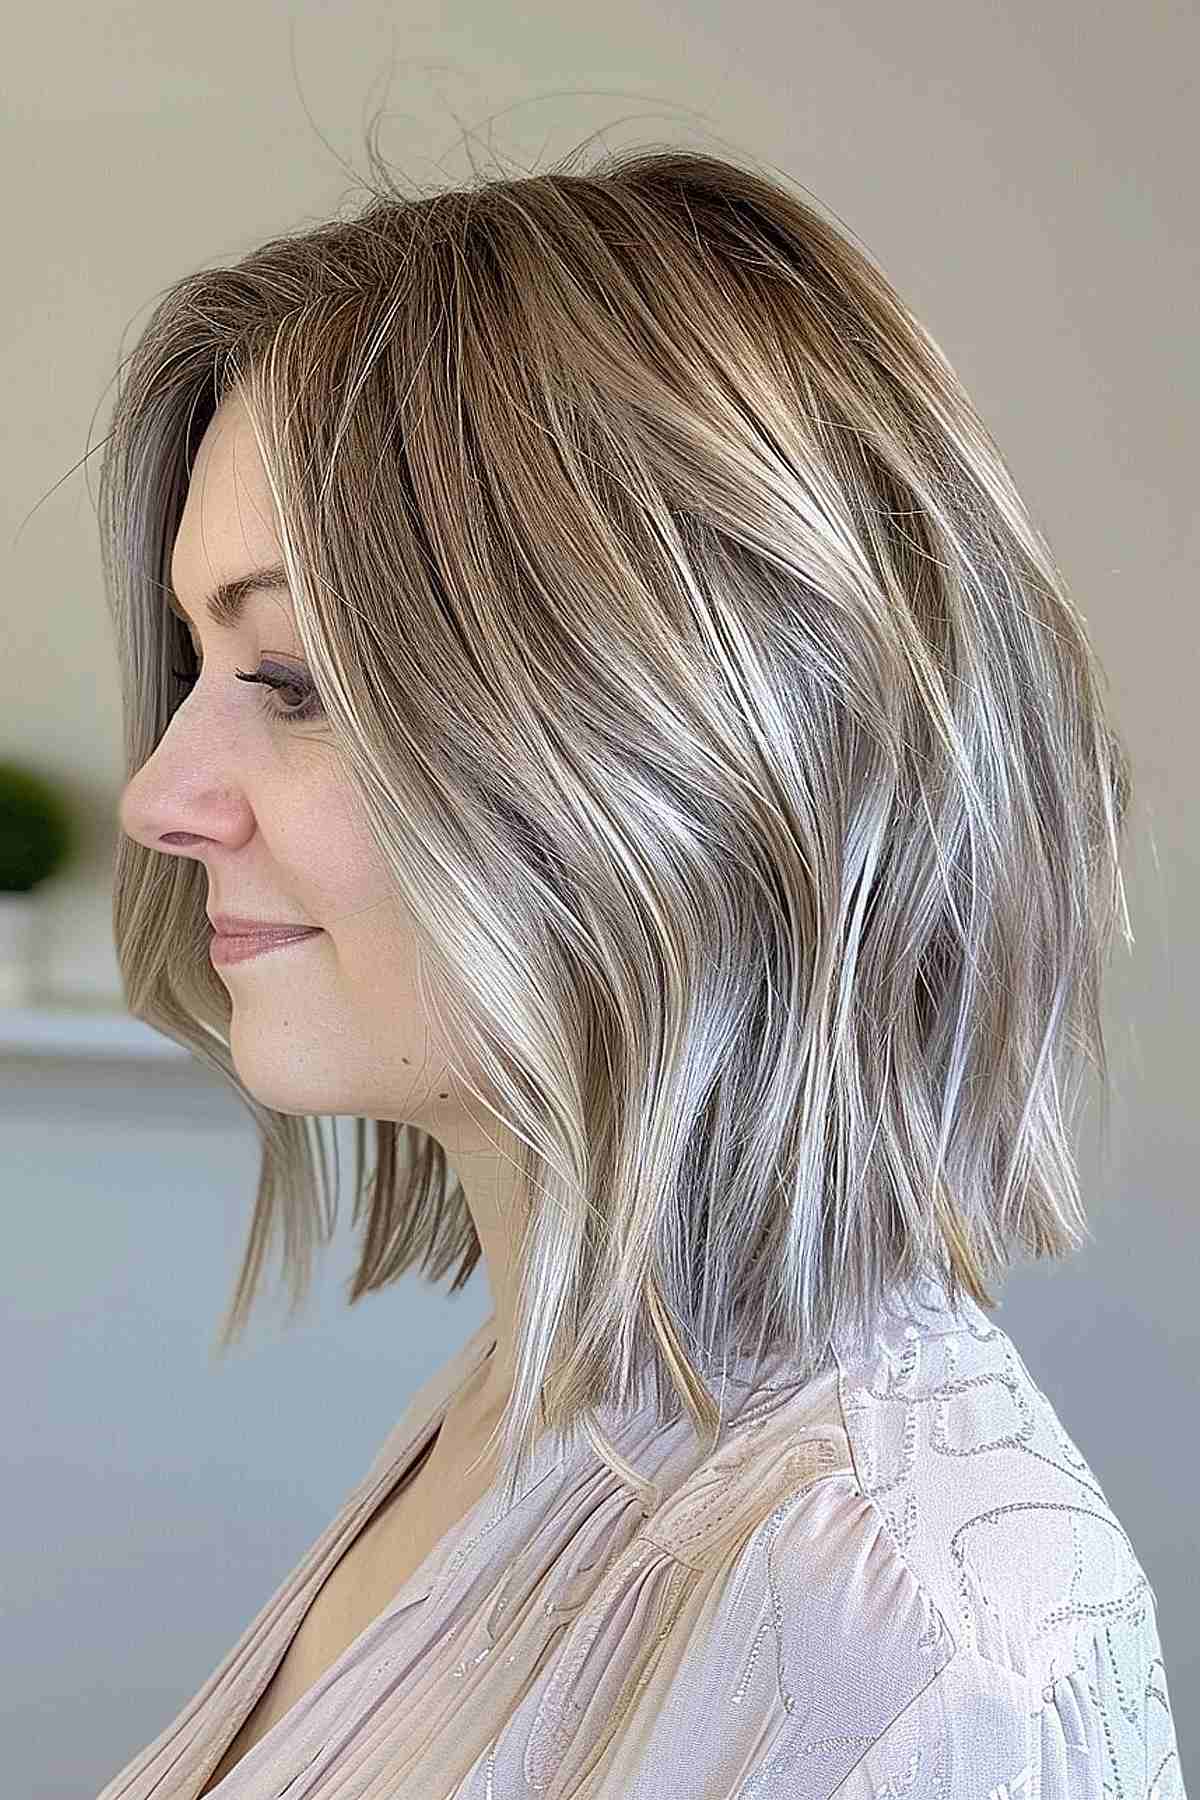 Medium-length ashy blonde bob with soft layers and highlights